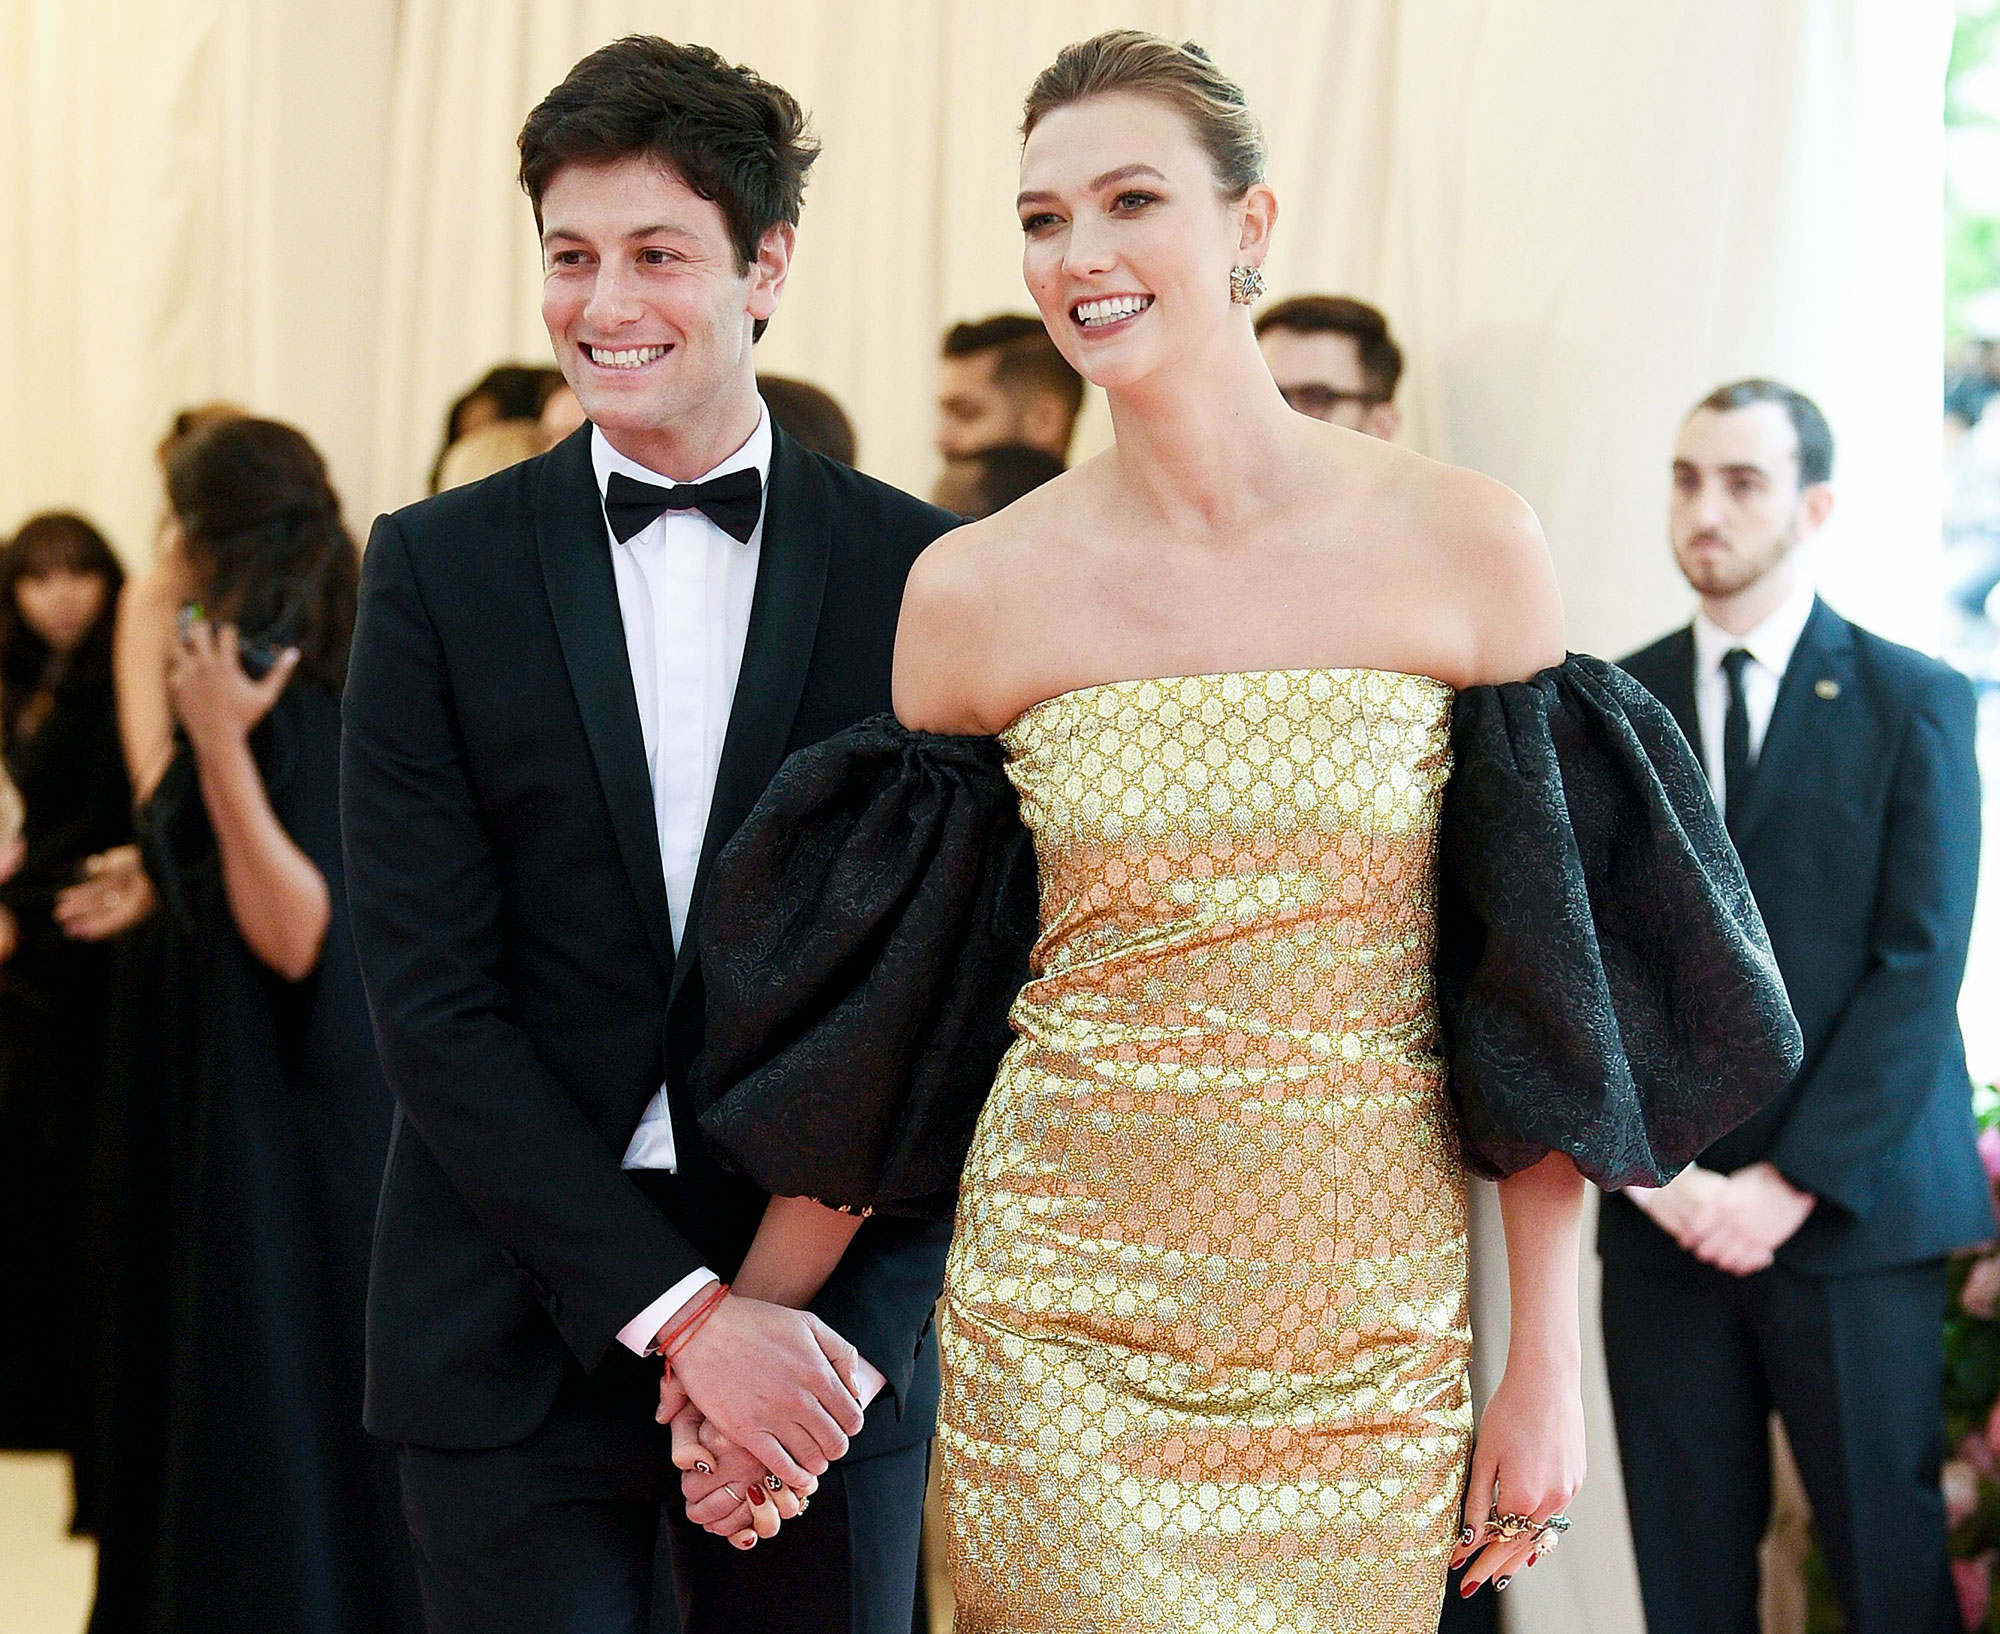 Karlie Kloss Responds to ‘Project Runway’ Contestant’s Kushner Diss